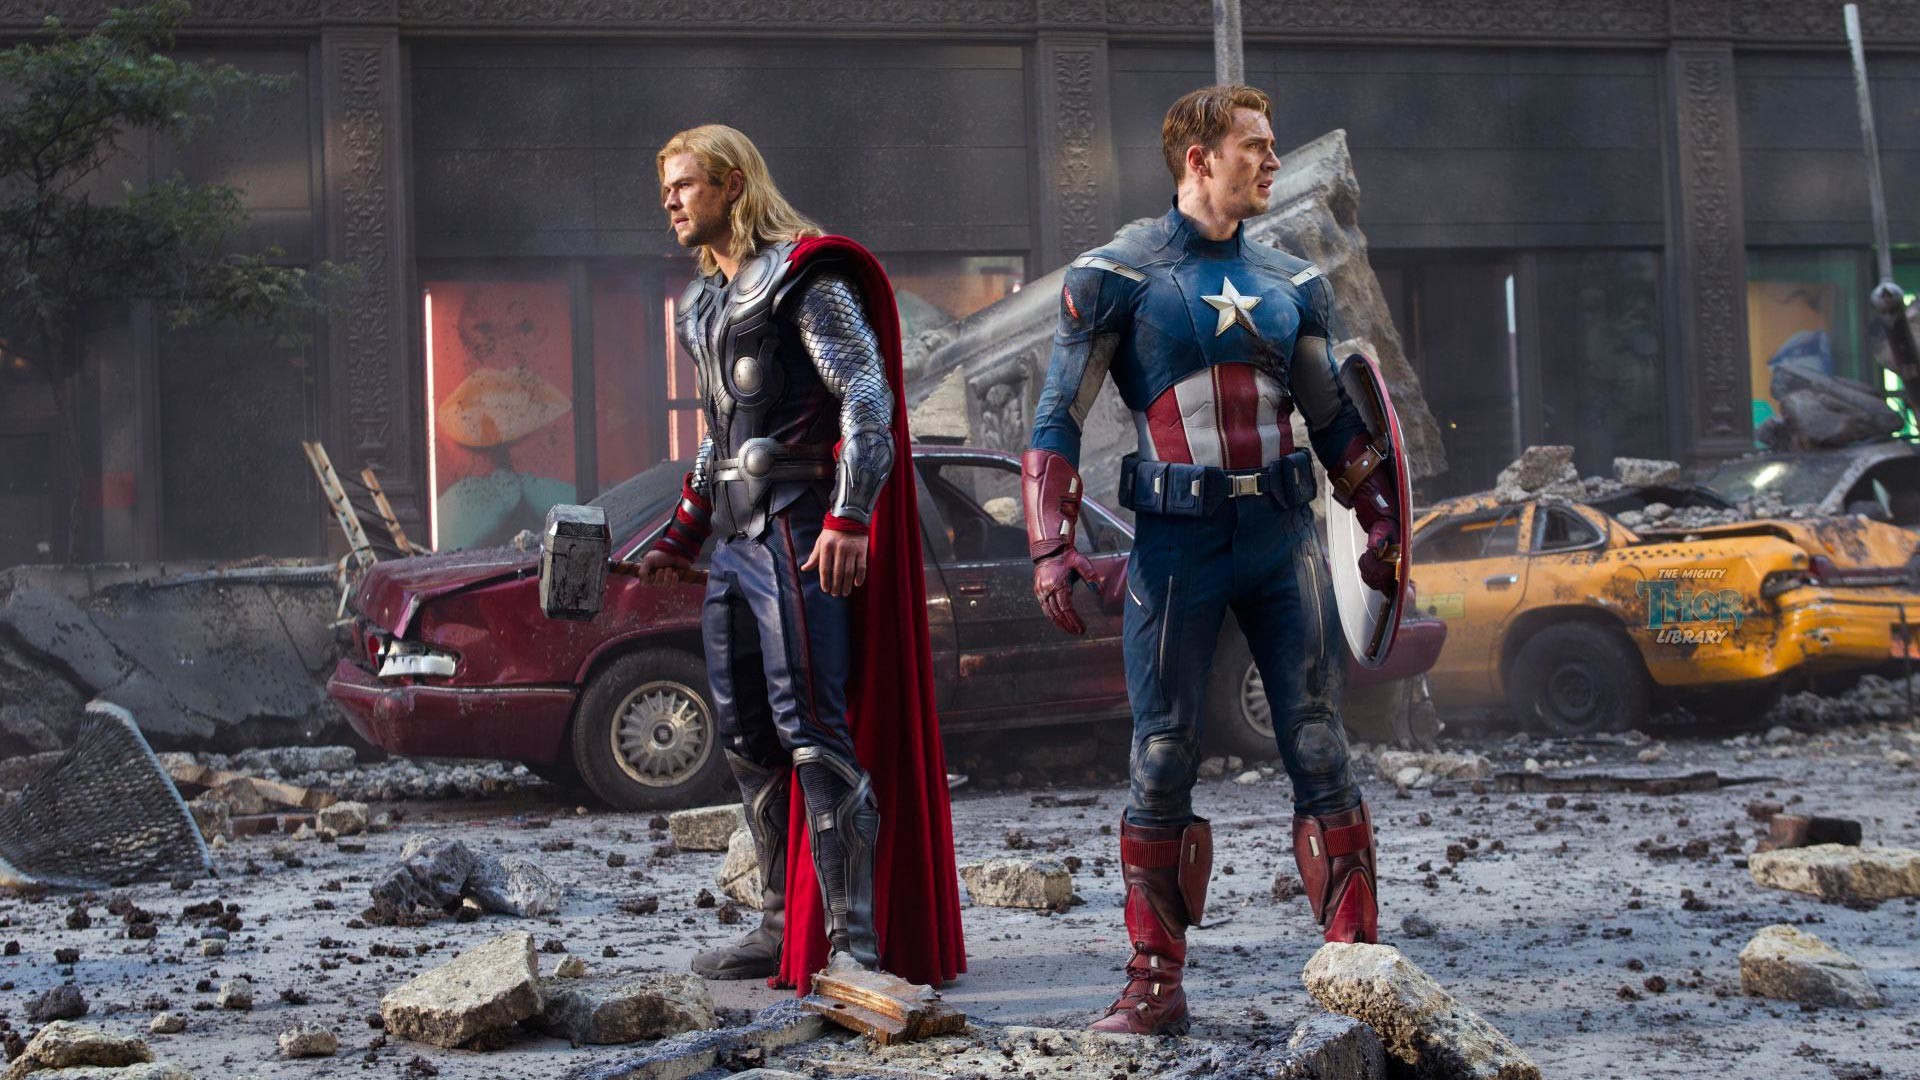 Thor and Captain America in Avengers Movie (1920 x 1080) wallpaper